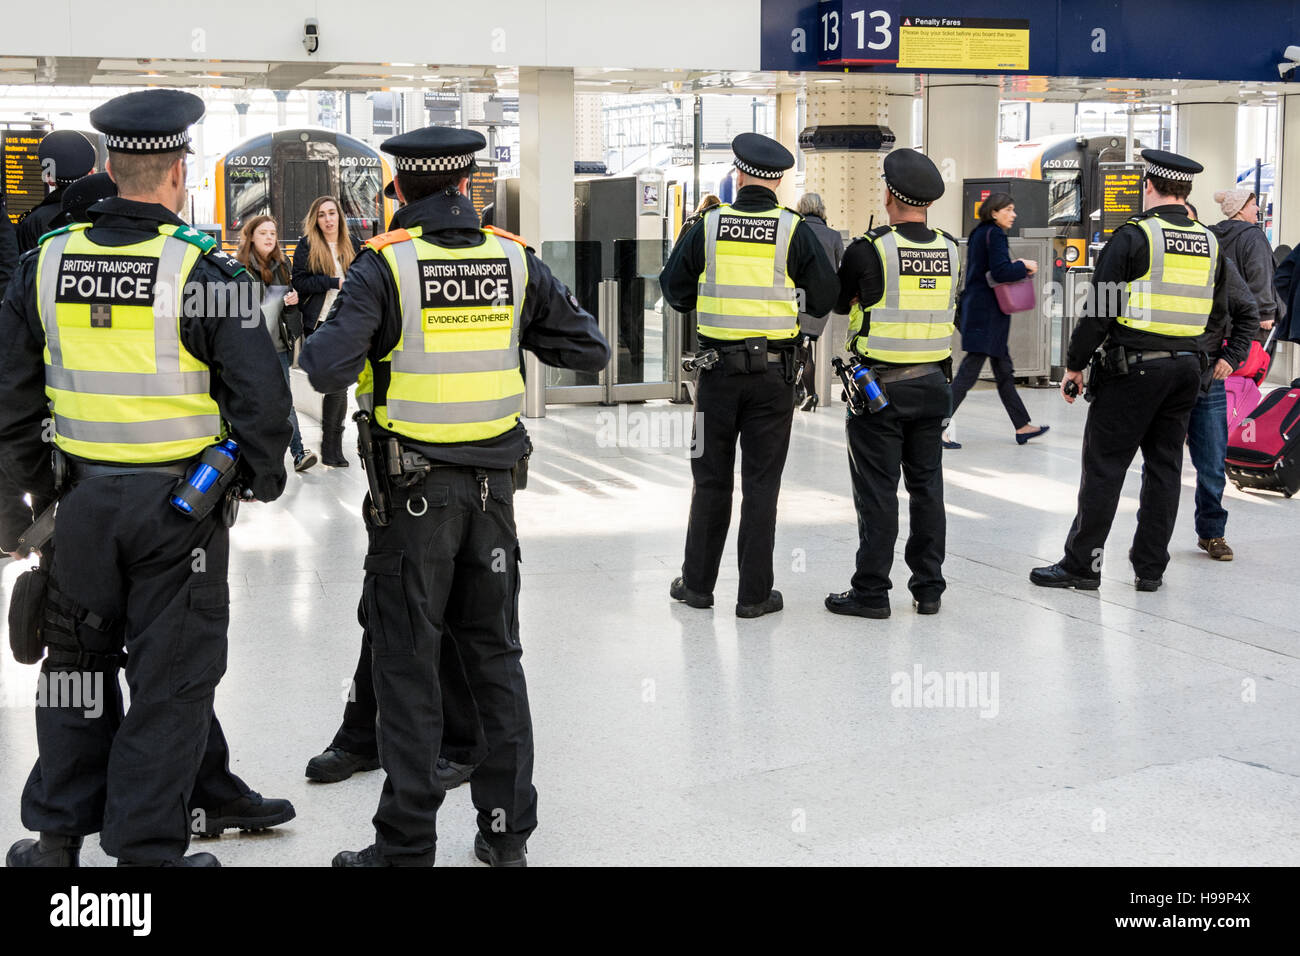 Metropolitan Police offers waiting for Scottish football supporters at a station in London, England, UK Stock Photo